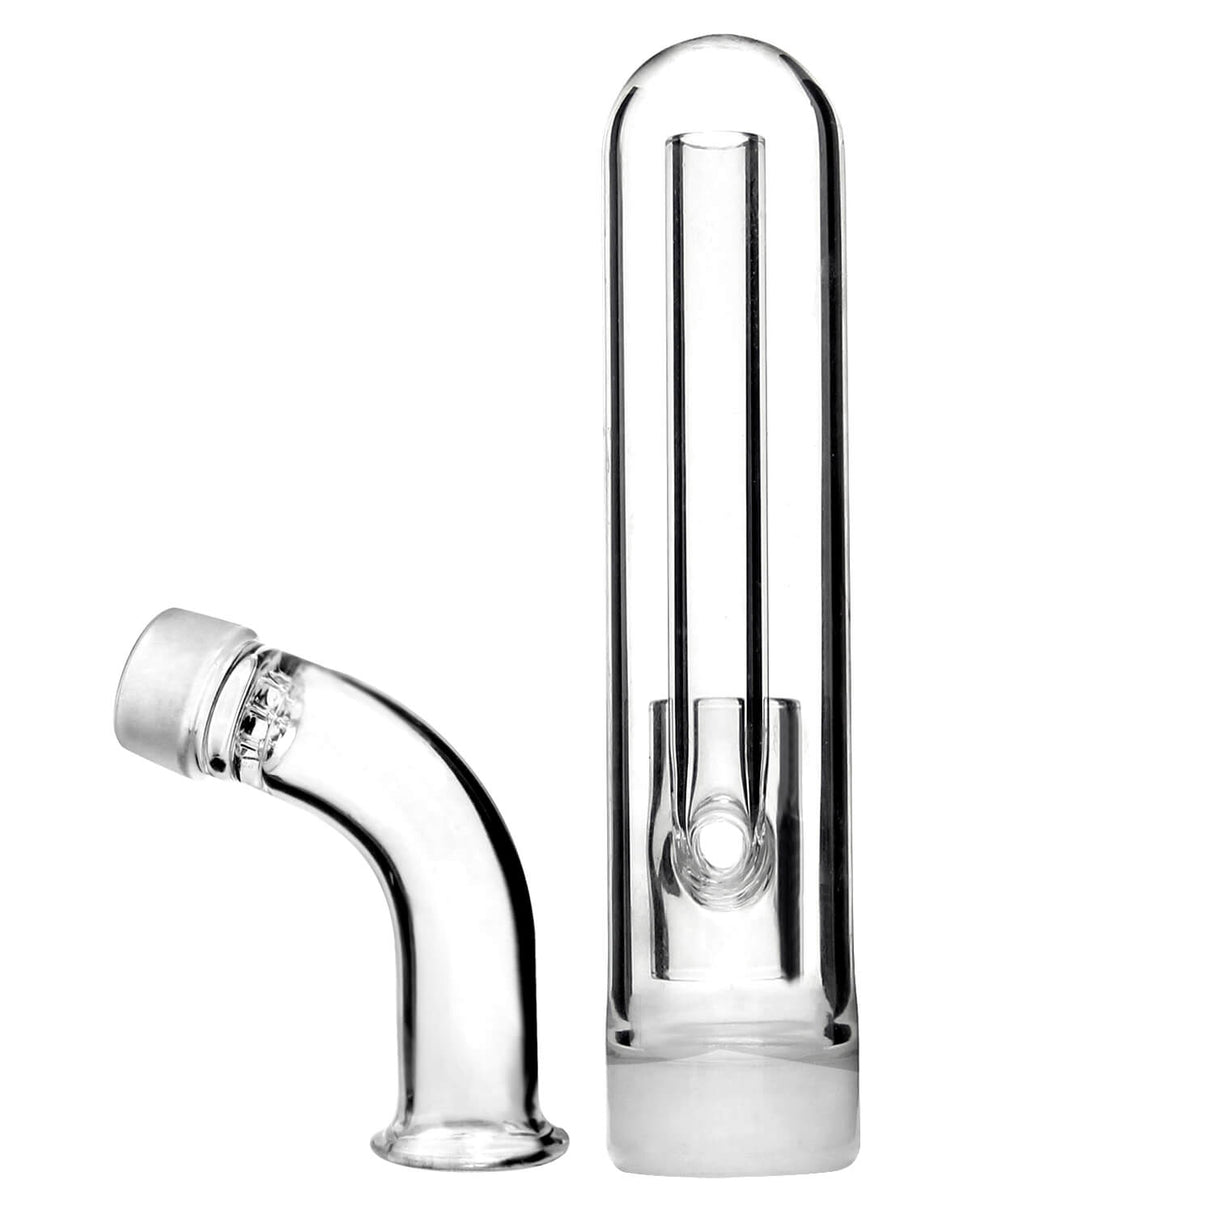 PILOT DIARY Glass Attachment for ECUBE, Clear Glass, Side View with Angled Mouthpiece